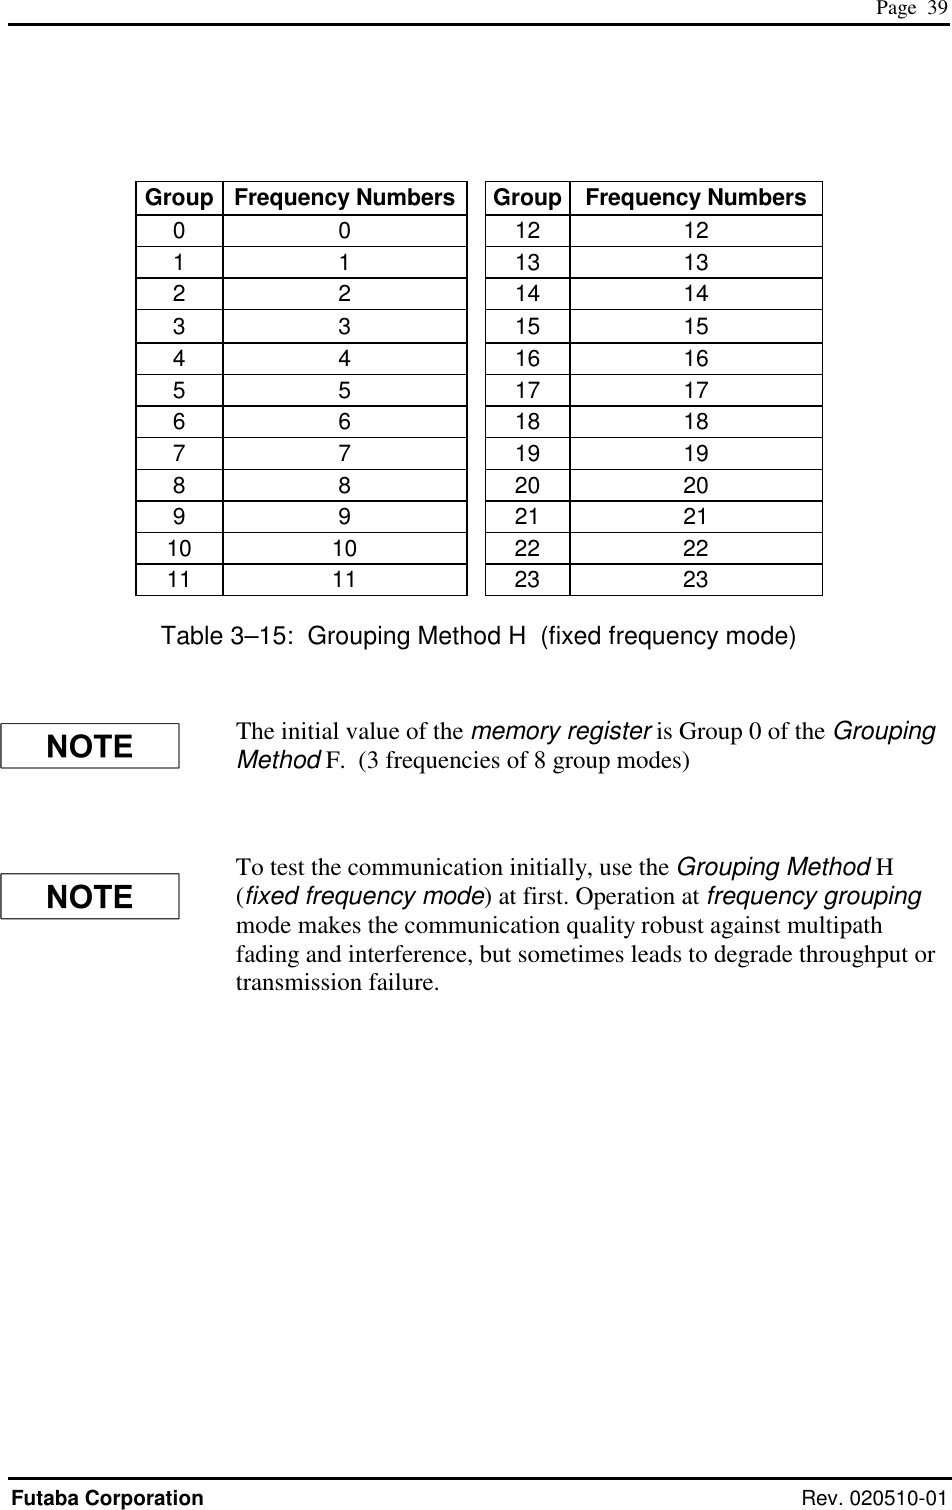  Page  39 Futaba Corporation Rev. 020510-01  Group  Frequency Numbers    Group  Frequency Numbers 0 0  12 12 1 1  13 13 2 2  14 14 3 3  15 15 4 4  16 16 5 5  17 17 6 6  18 18 7 7  19 19 8 8  20 20 9 9  21 21 10 10  22 22 11 11  23 23 Table 3–15:  Grouping Method H  (fixed frequency mode) The initial value of the memory register is Group 0 of the Grouping Method F.  (3 frequencies of 8 group modes)  To test the communication initially, use the Grouping Method H (fixed frequency mode) at first. Operation at frequency grouping mode makes the communication quality robust against multipath fading and interference, but sometimes leads to degrade throughput or transmission failure. 